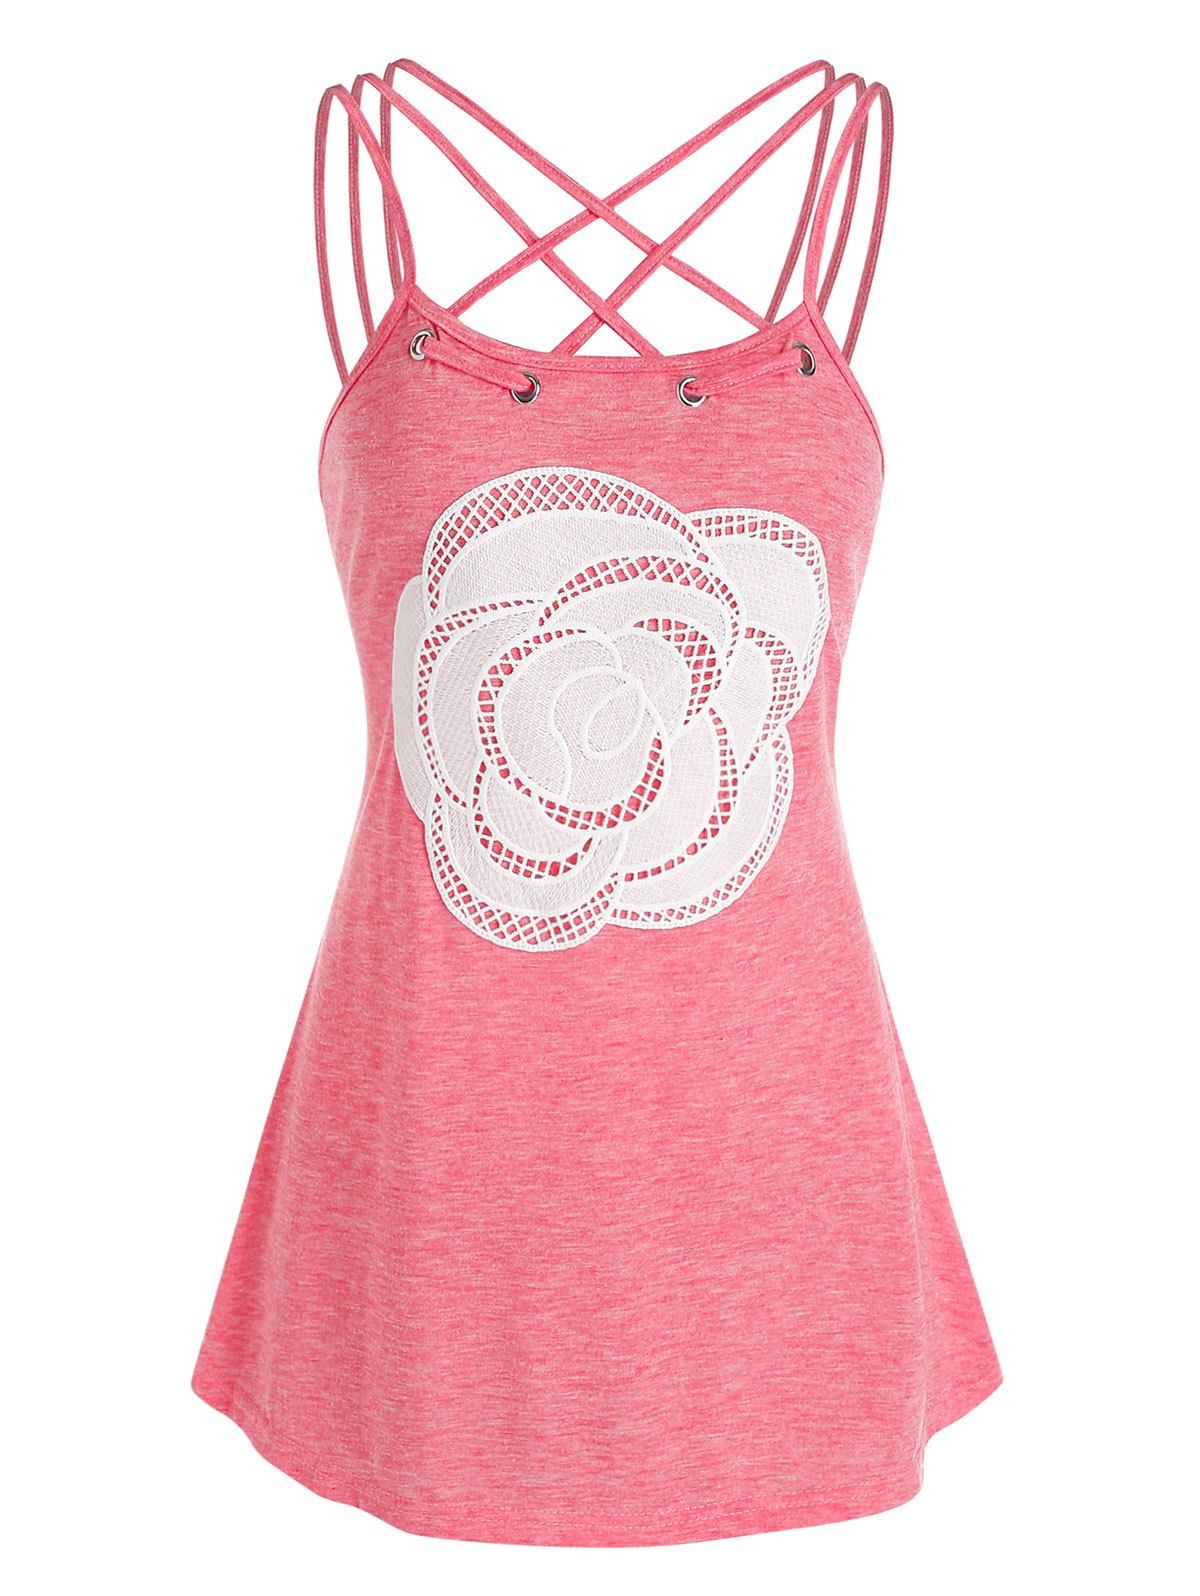 Strappy Flower Lace Panel Heathered Tank Top - LIGHT PINK XXXL